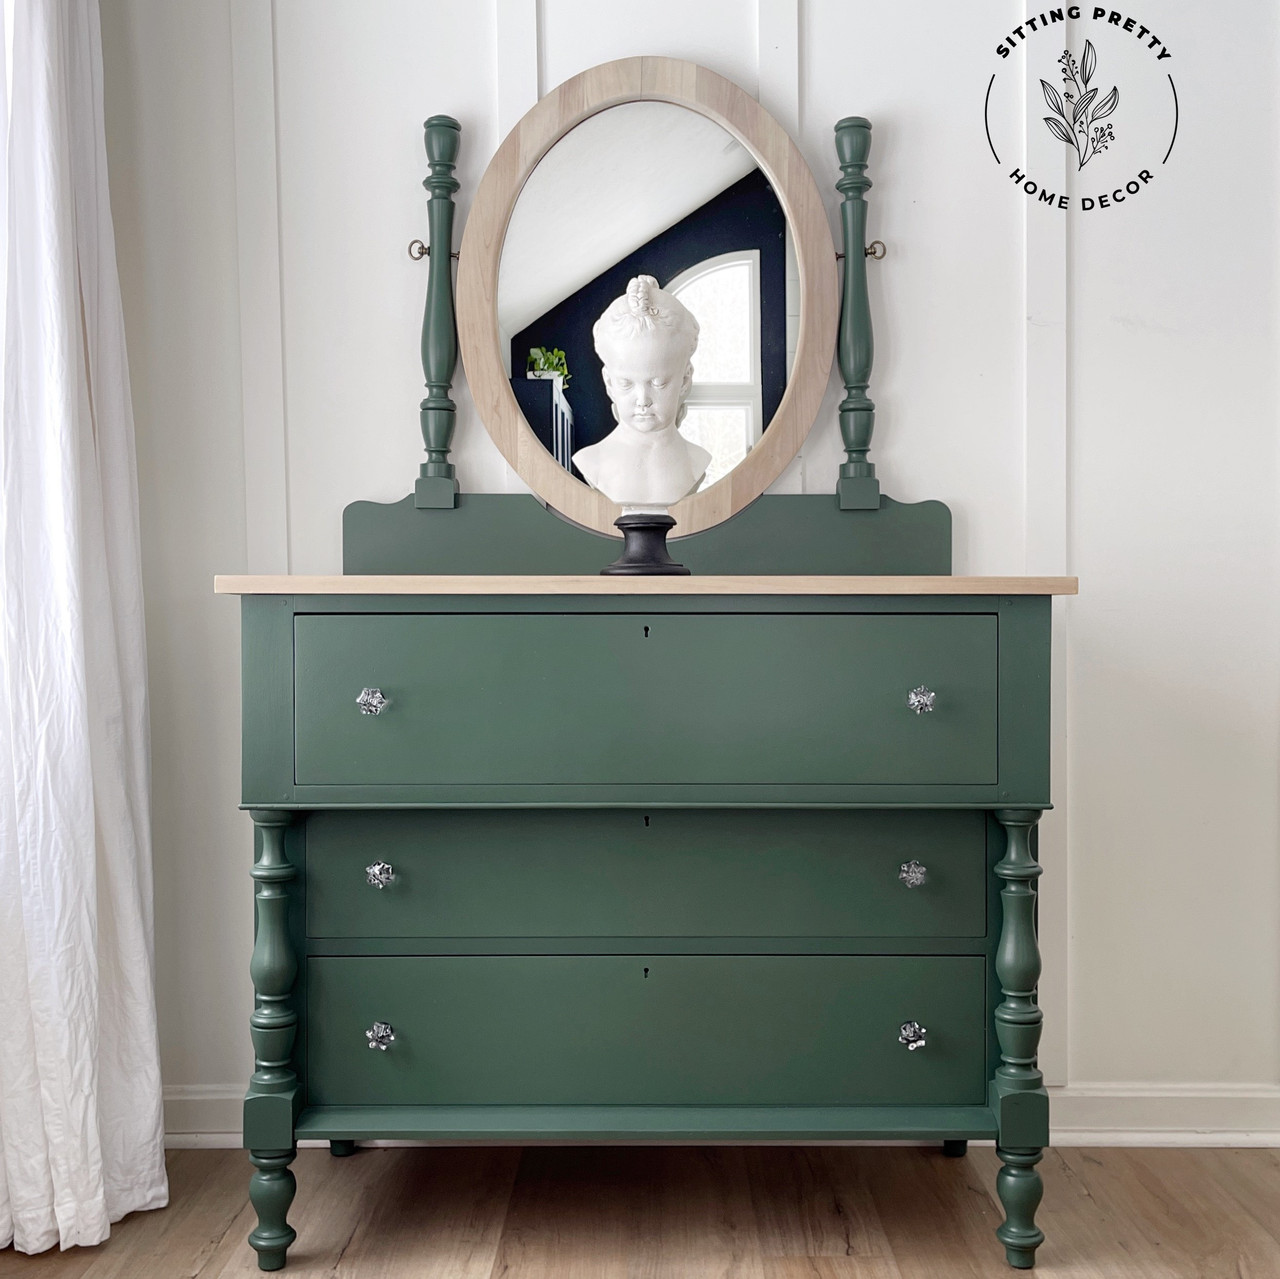 Country Chic Paint- Paint the Town – Heart And Soul Interiors